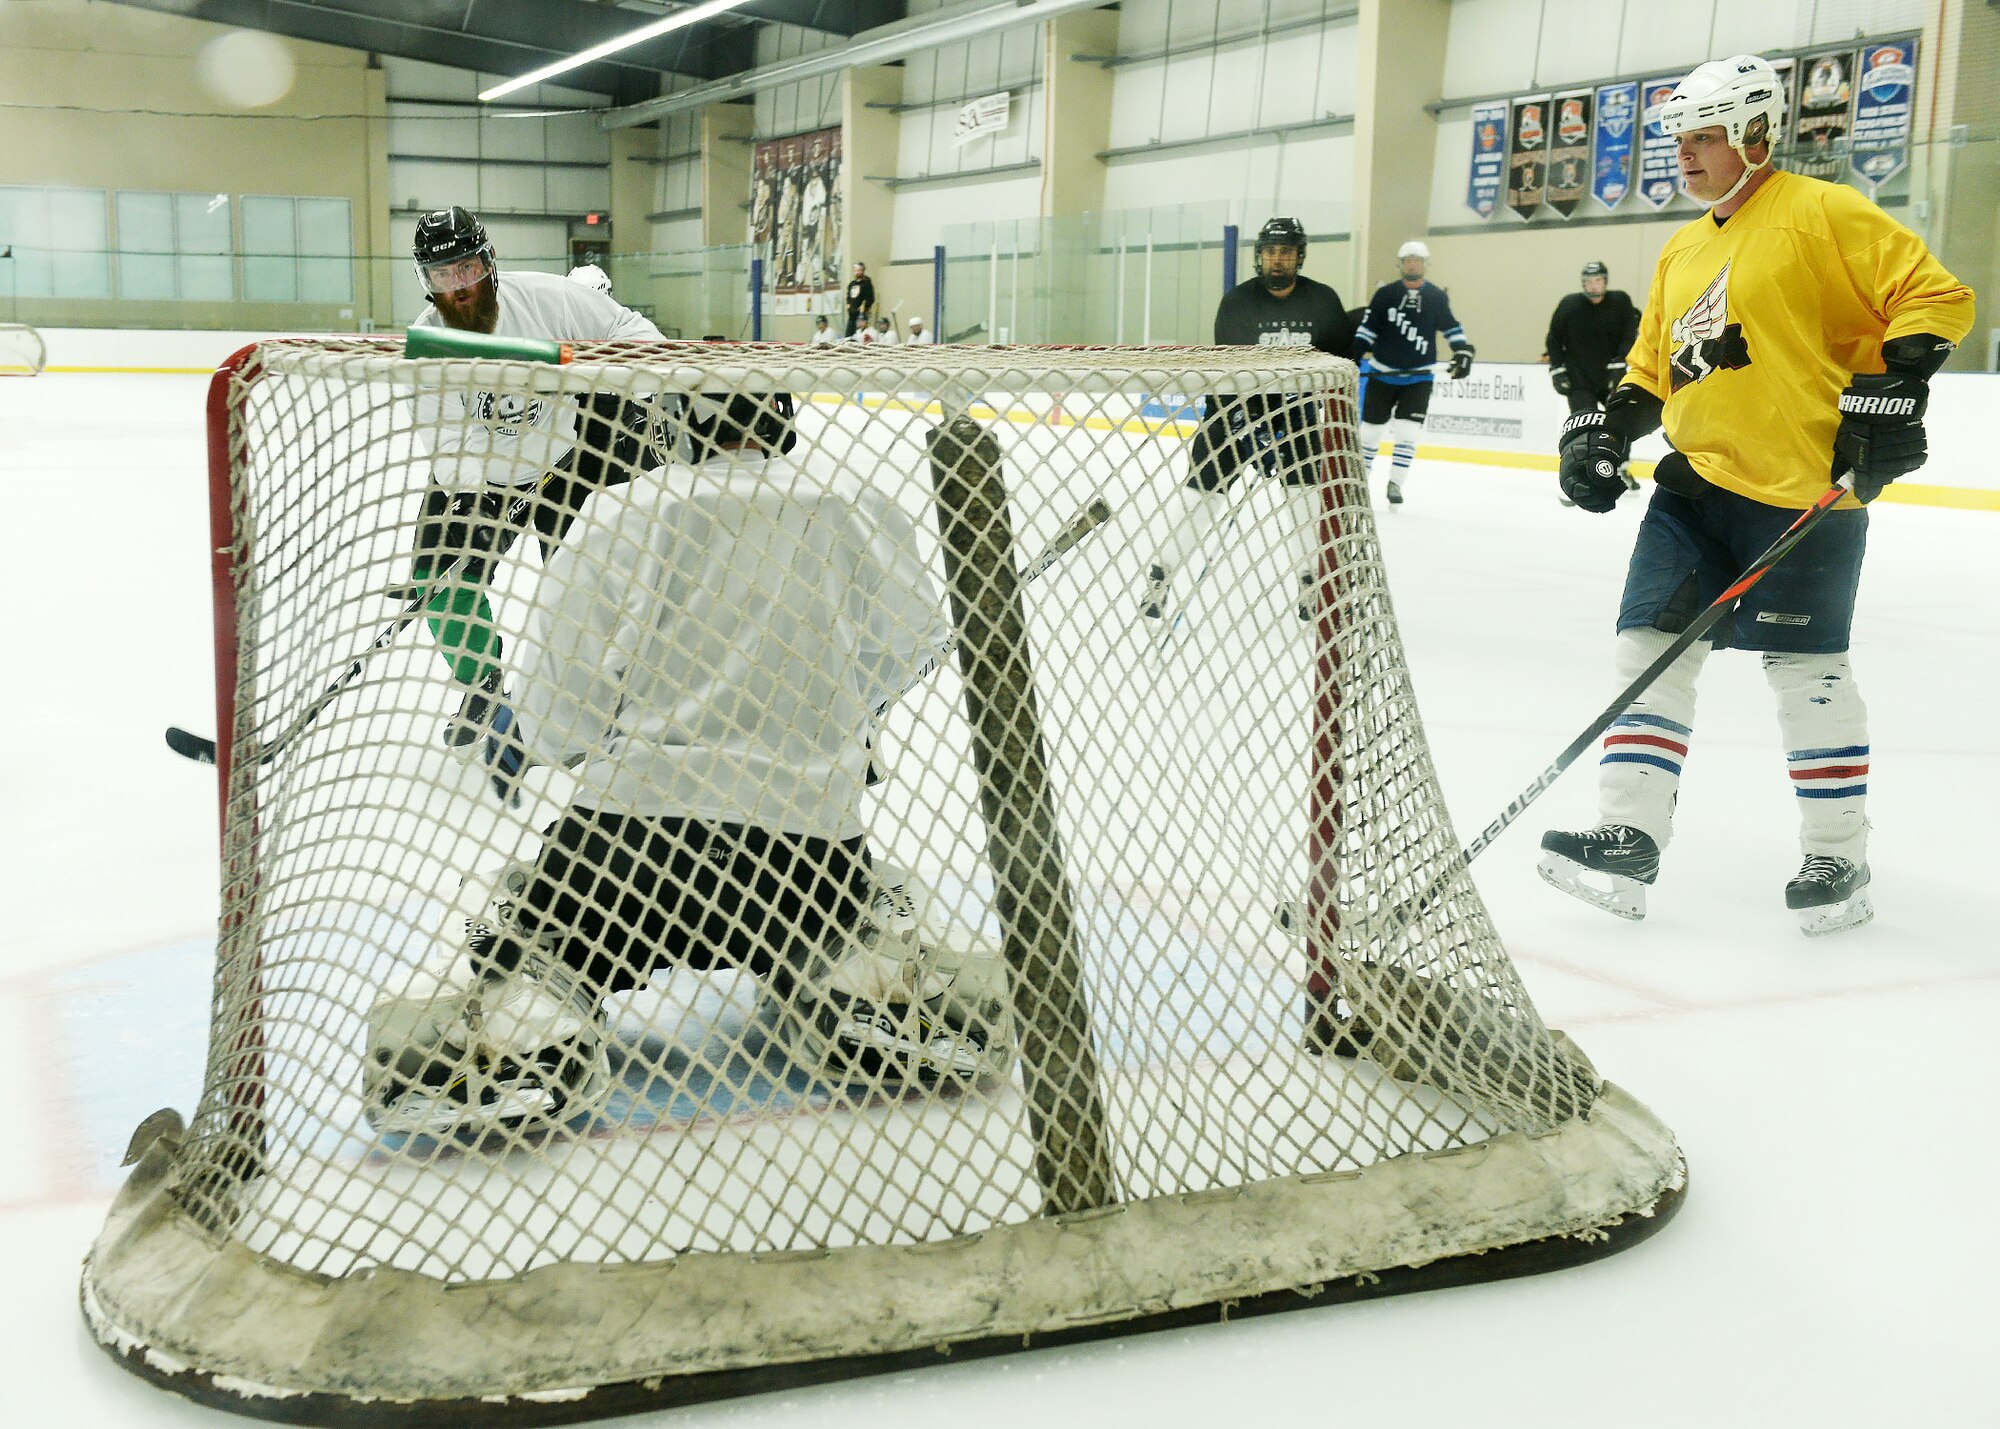 The Nebraska Warriors hockey team scrimmages at Ralston Arena in Ralston, Nebraska. Several players approach the net as a goalie tries to defend.